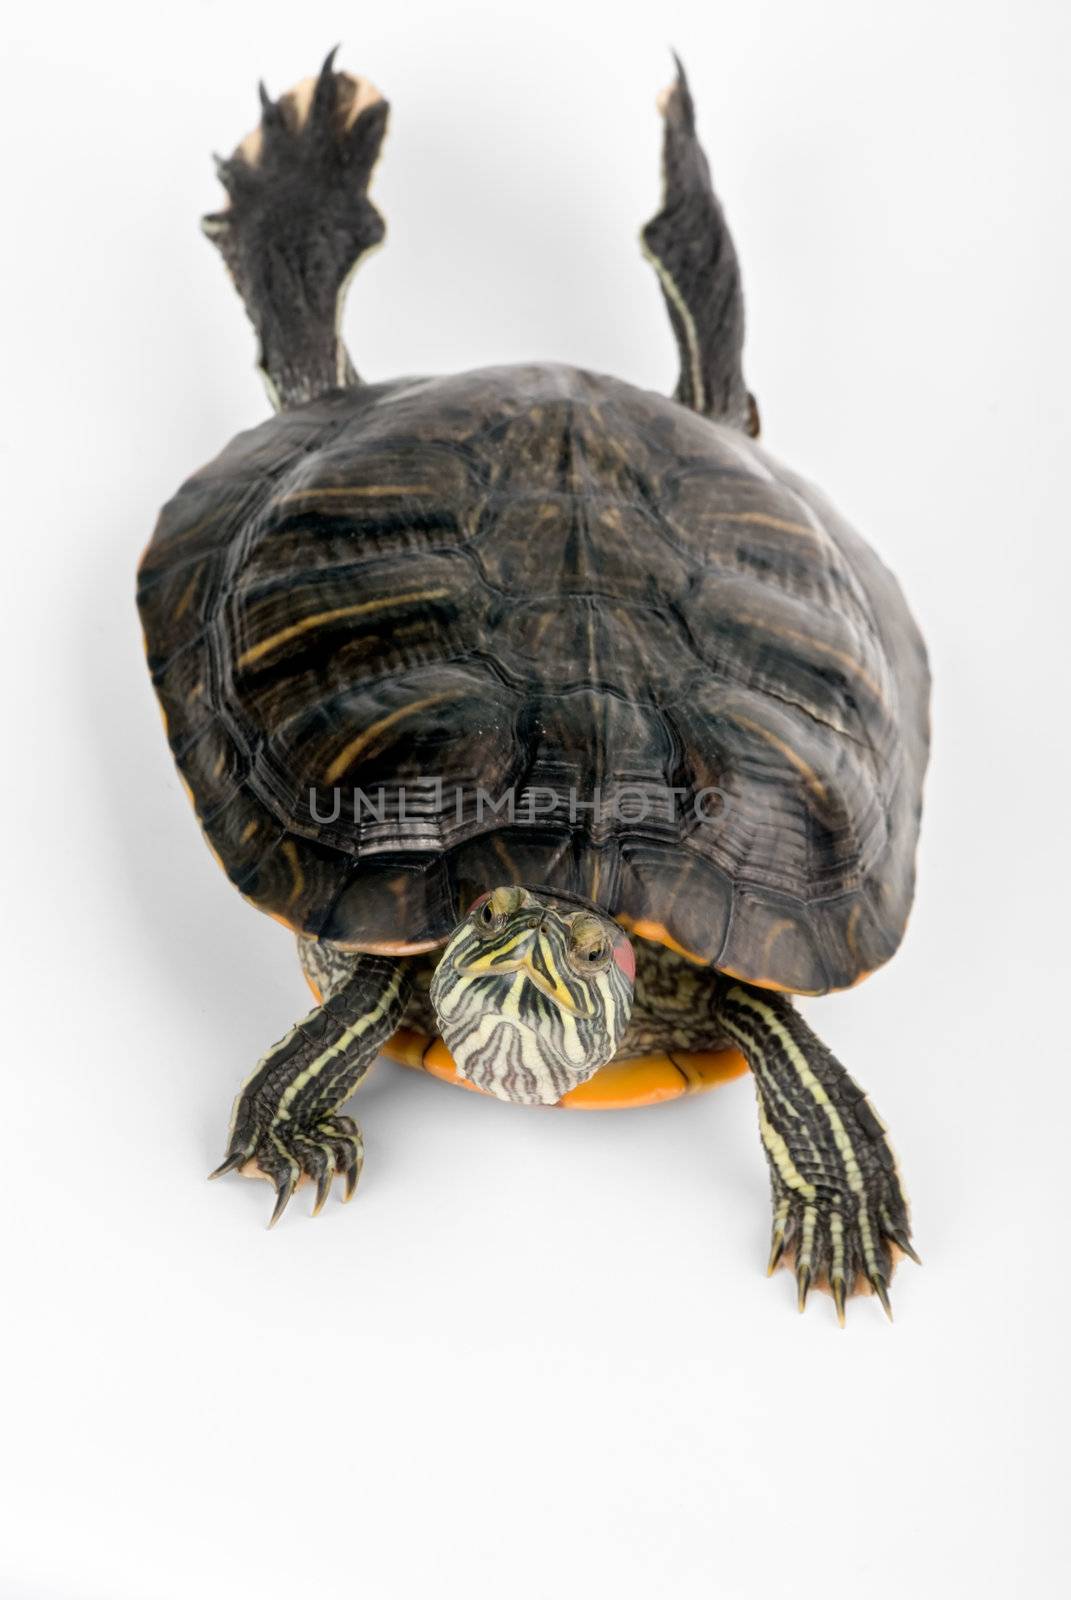 Turtle on a white background. See more in my portfolio